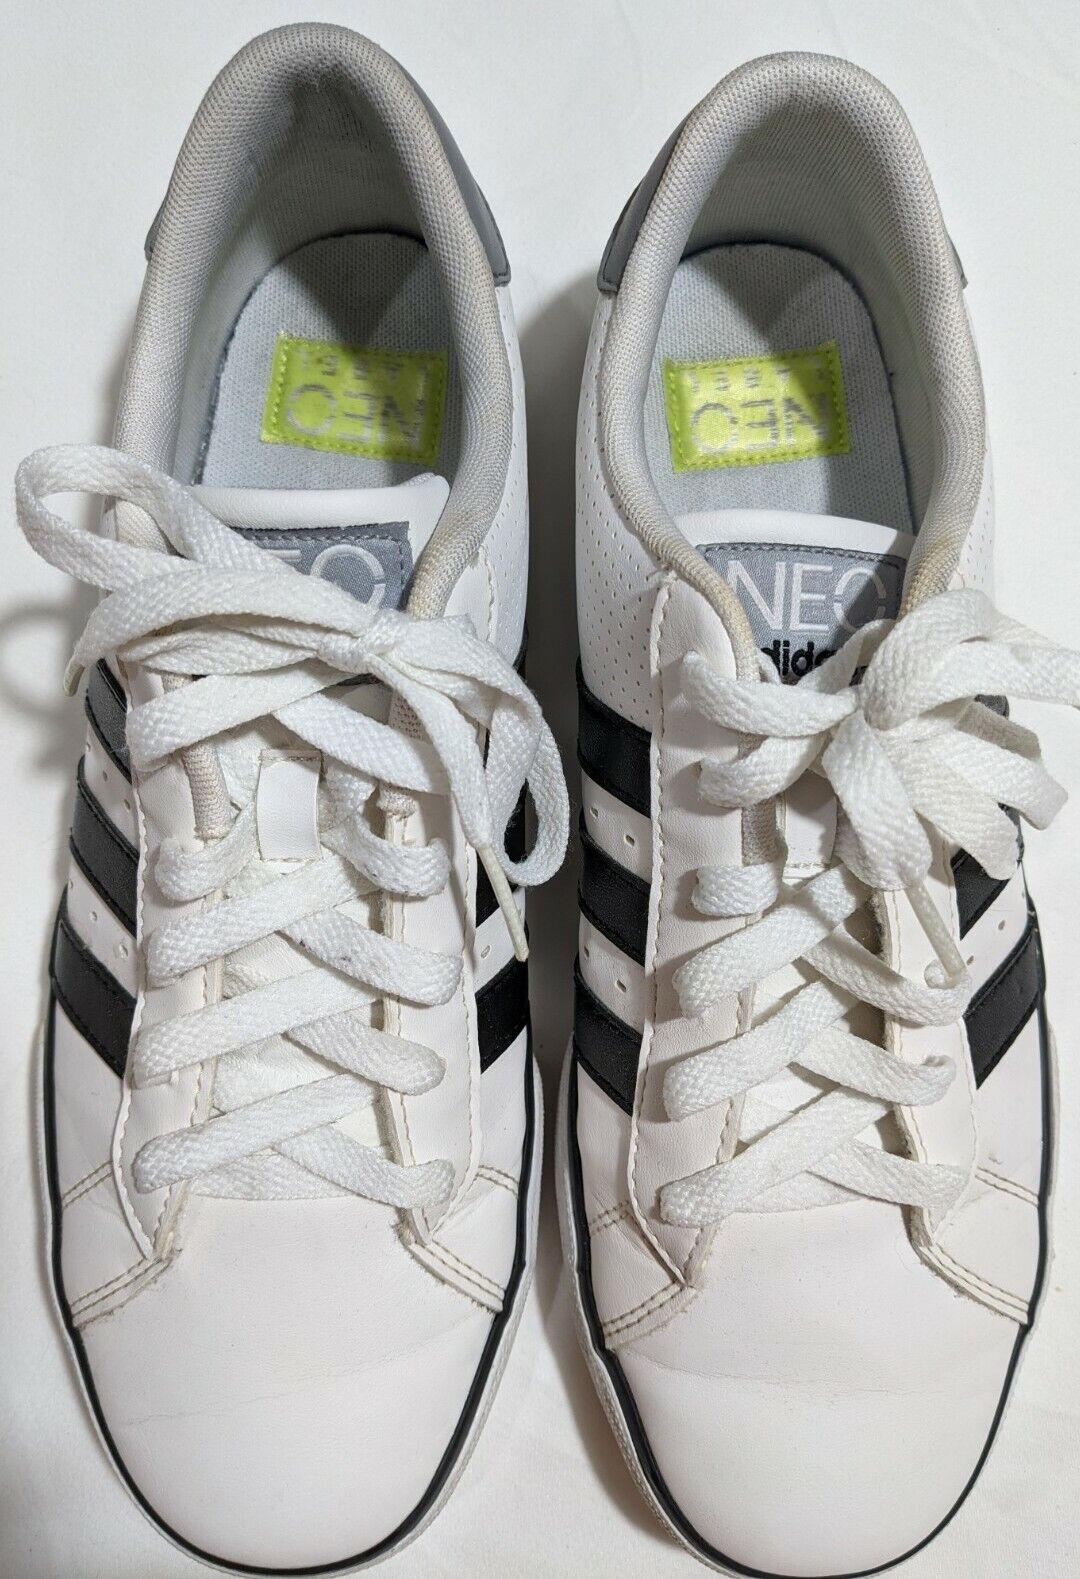 Rarely Adidas Neo Label leather with black stripes Sz 8 shoes eBay